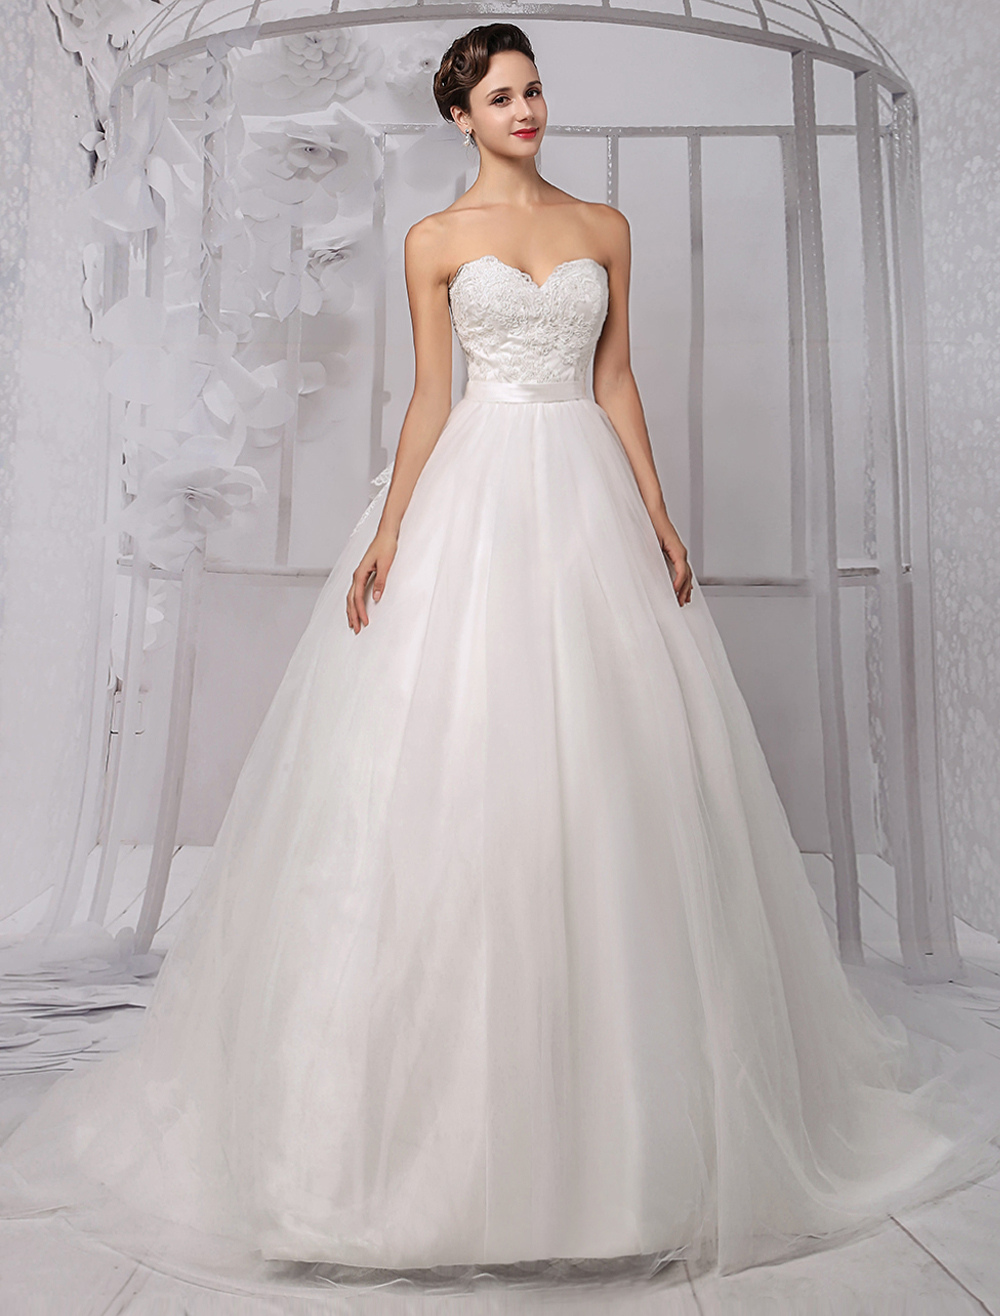 Sweatheart Princess/Ball Gown Off-the-Shoulder Bridal Gown With Ruffles ...